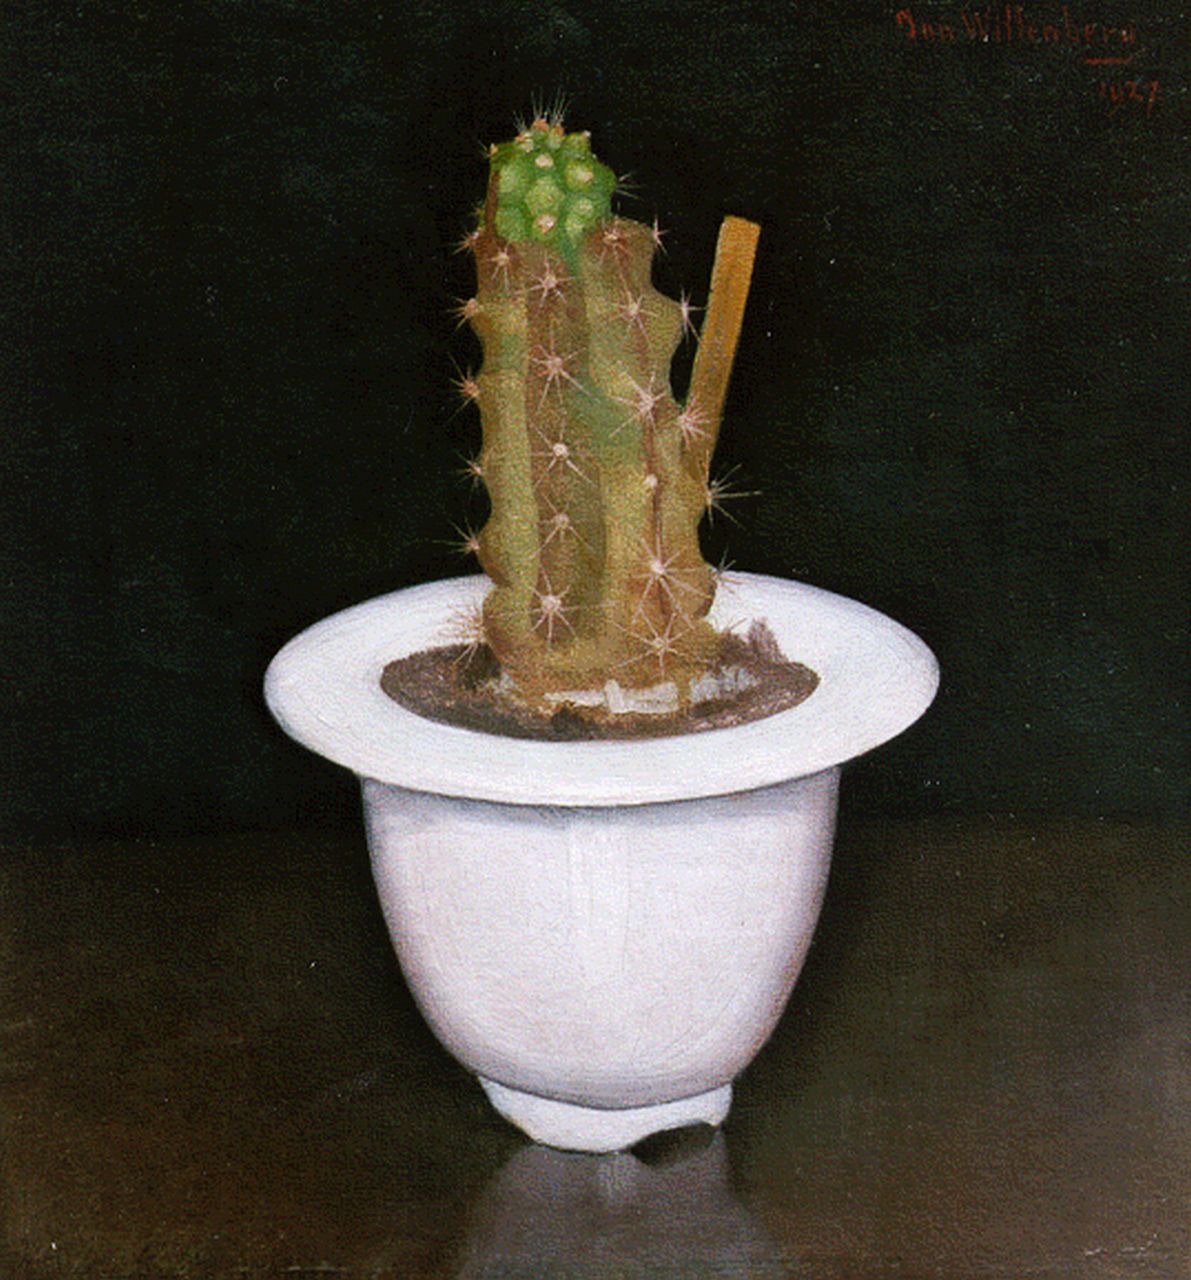 Wittenberg J.H.W.  | 'Jan' Hendrik Willem Wittenberg, Cactus in a white pot, oil on canvas laid down on panel 17.0 x 15.7 cm, signed u.r. and dated 1927